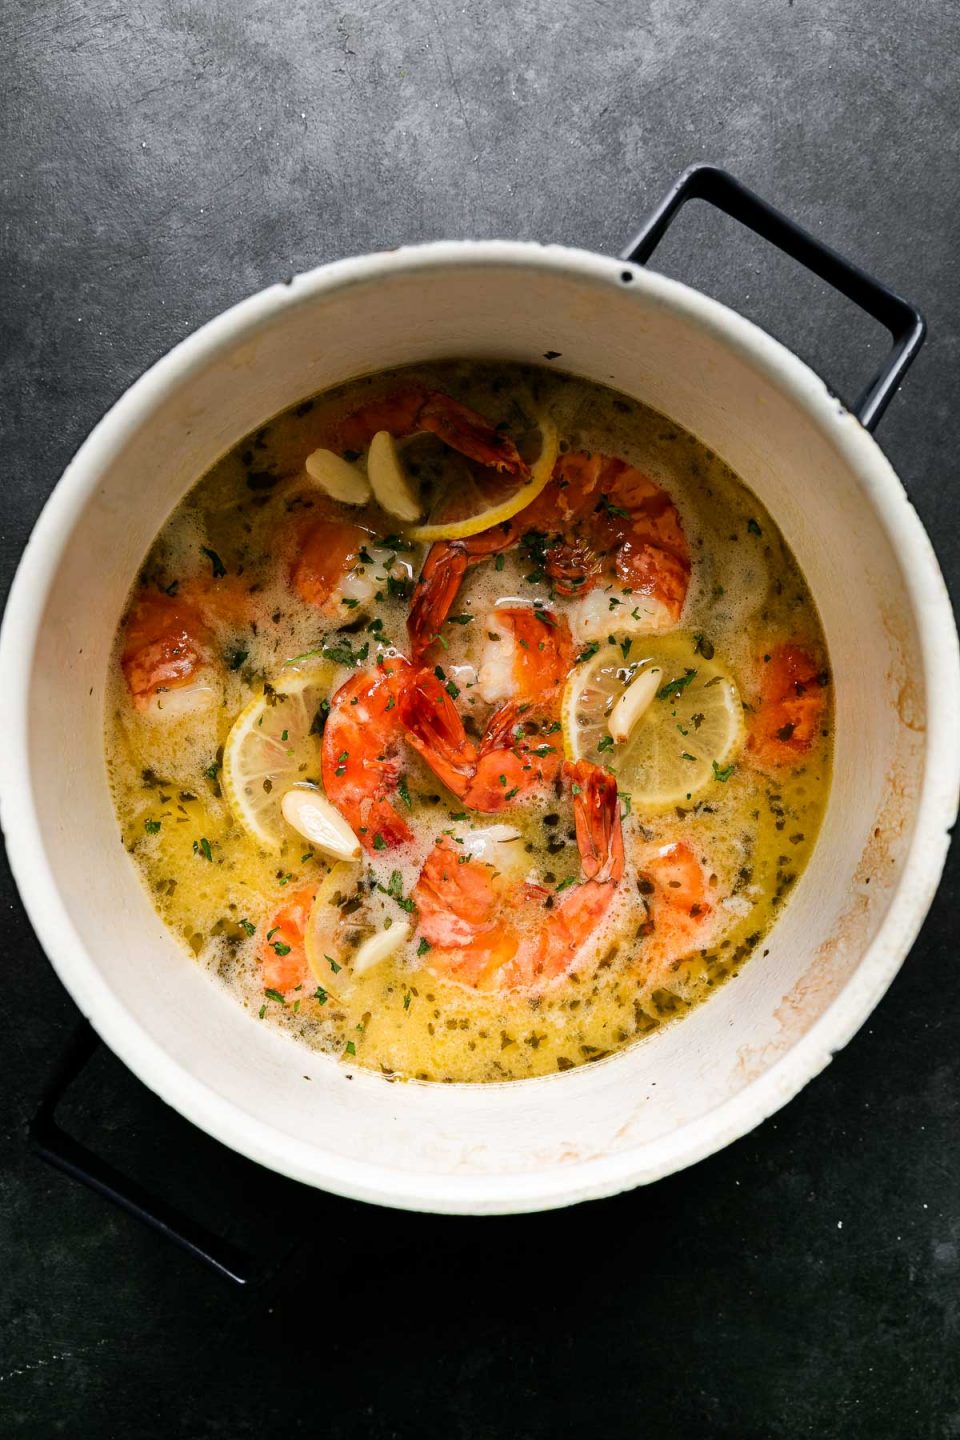 How to Make Prosecco Butter Poached Shrimp, Step 4: Poach the shrimp. Gently poached shrimp rest inside of a saucepan filled with a lemon garlic Prosecco butter poaching liquid. The saucepan sits atop a black textured surface and a gray and white striped napkin rests alongside the saucepan.